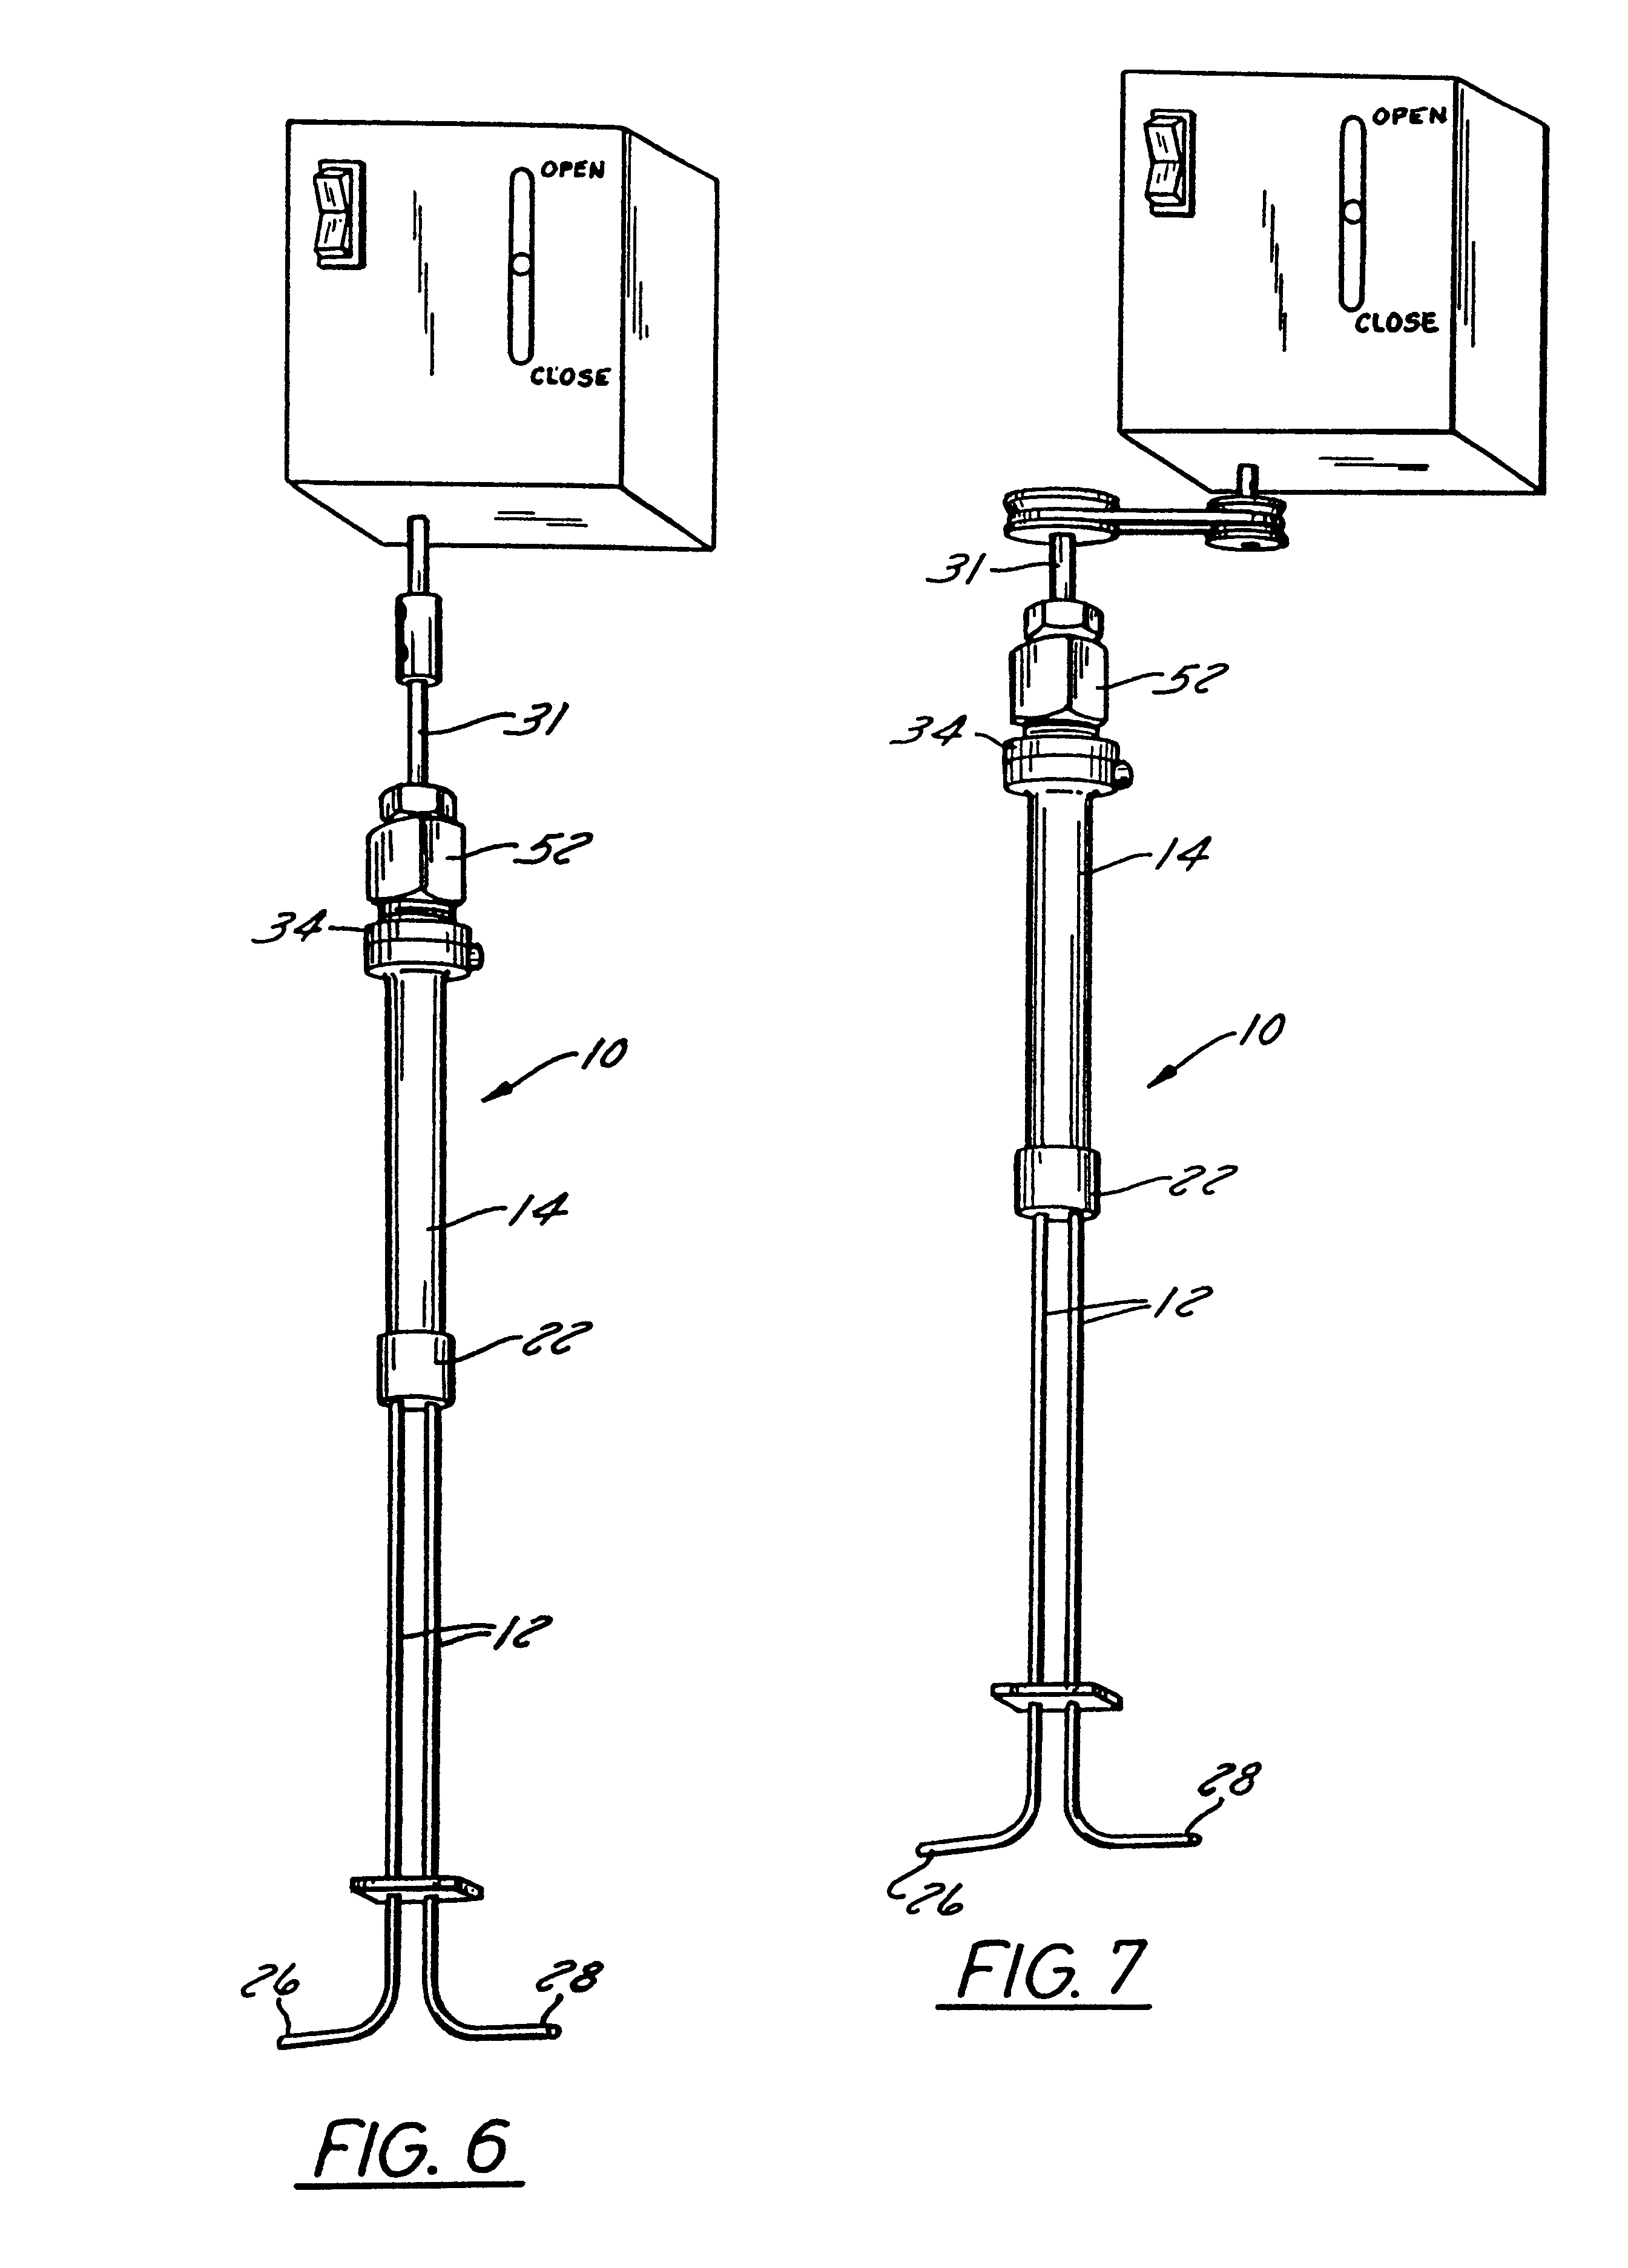 Variable pressure reducing device